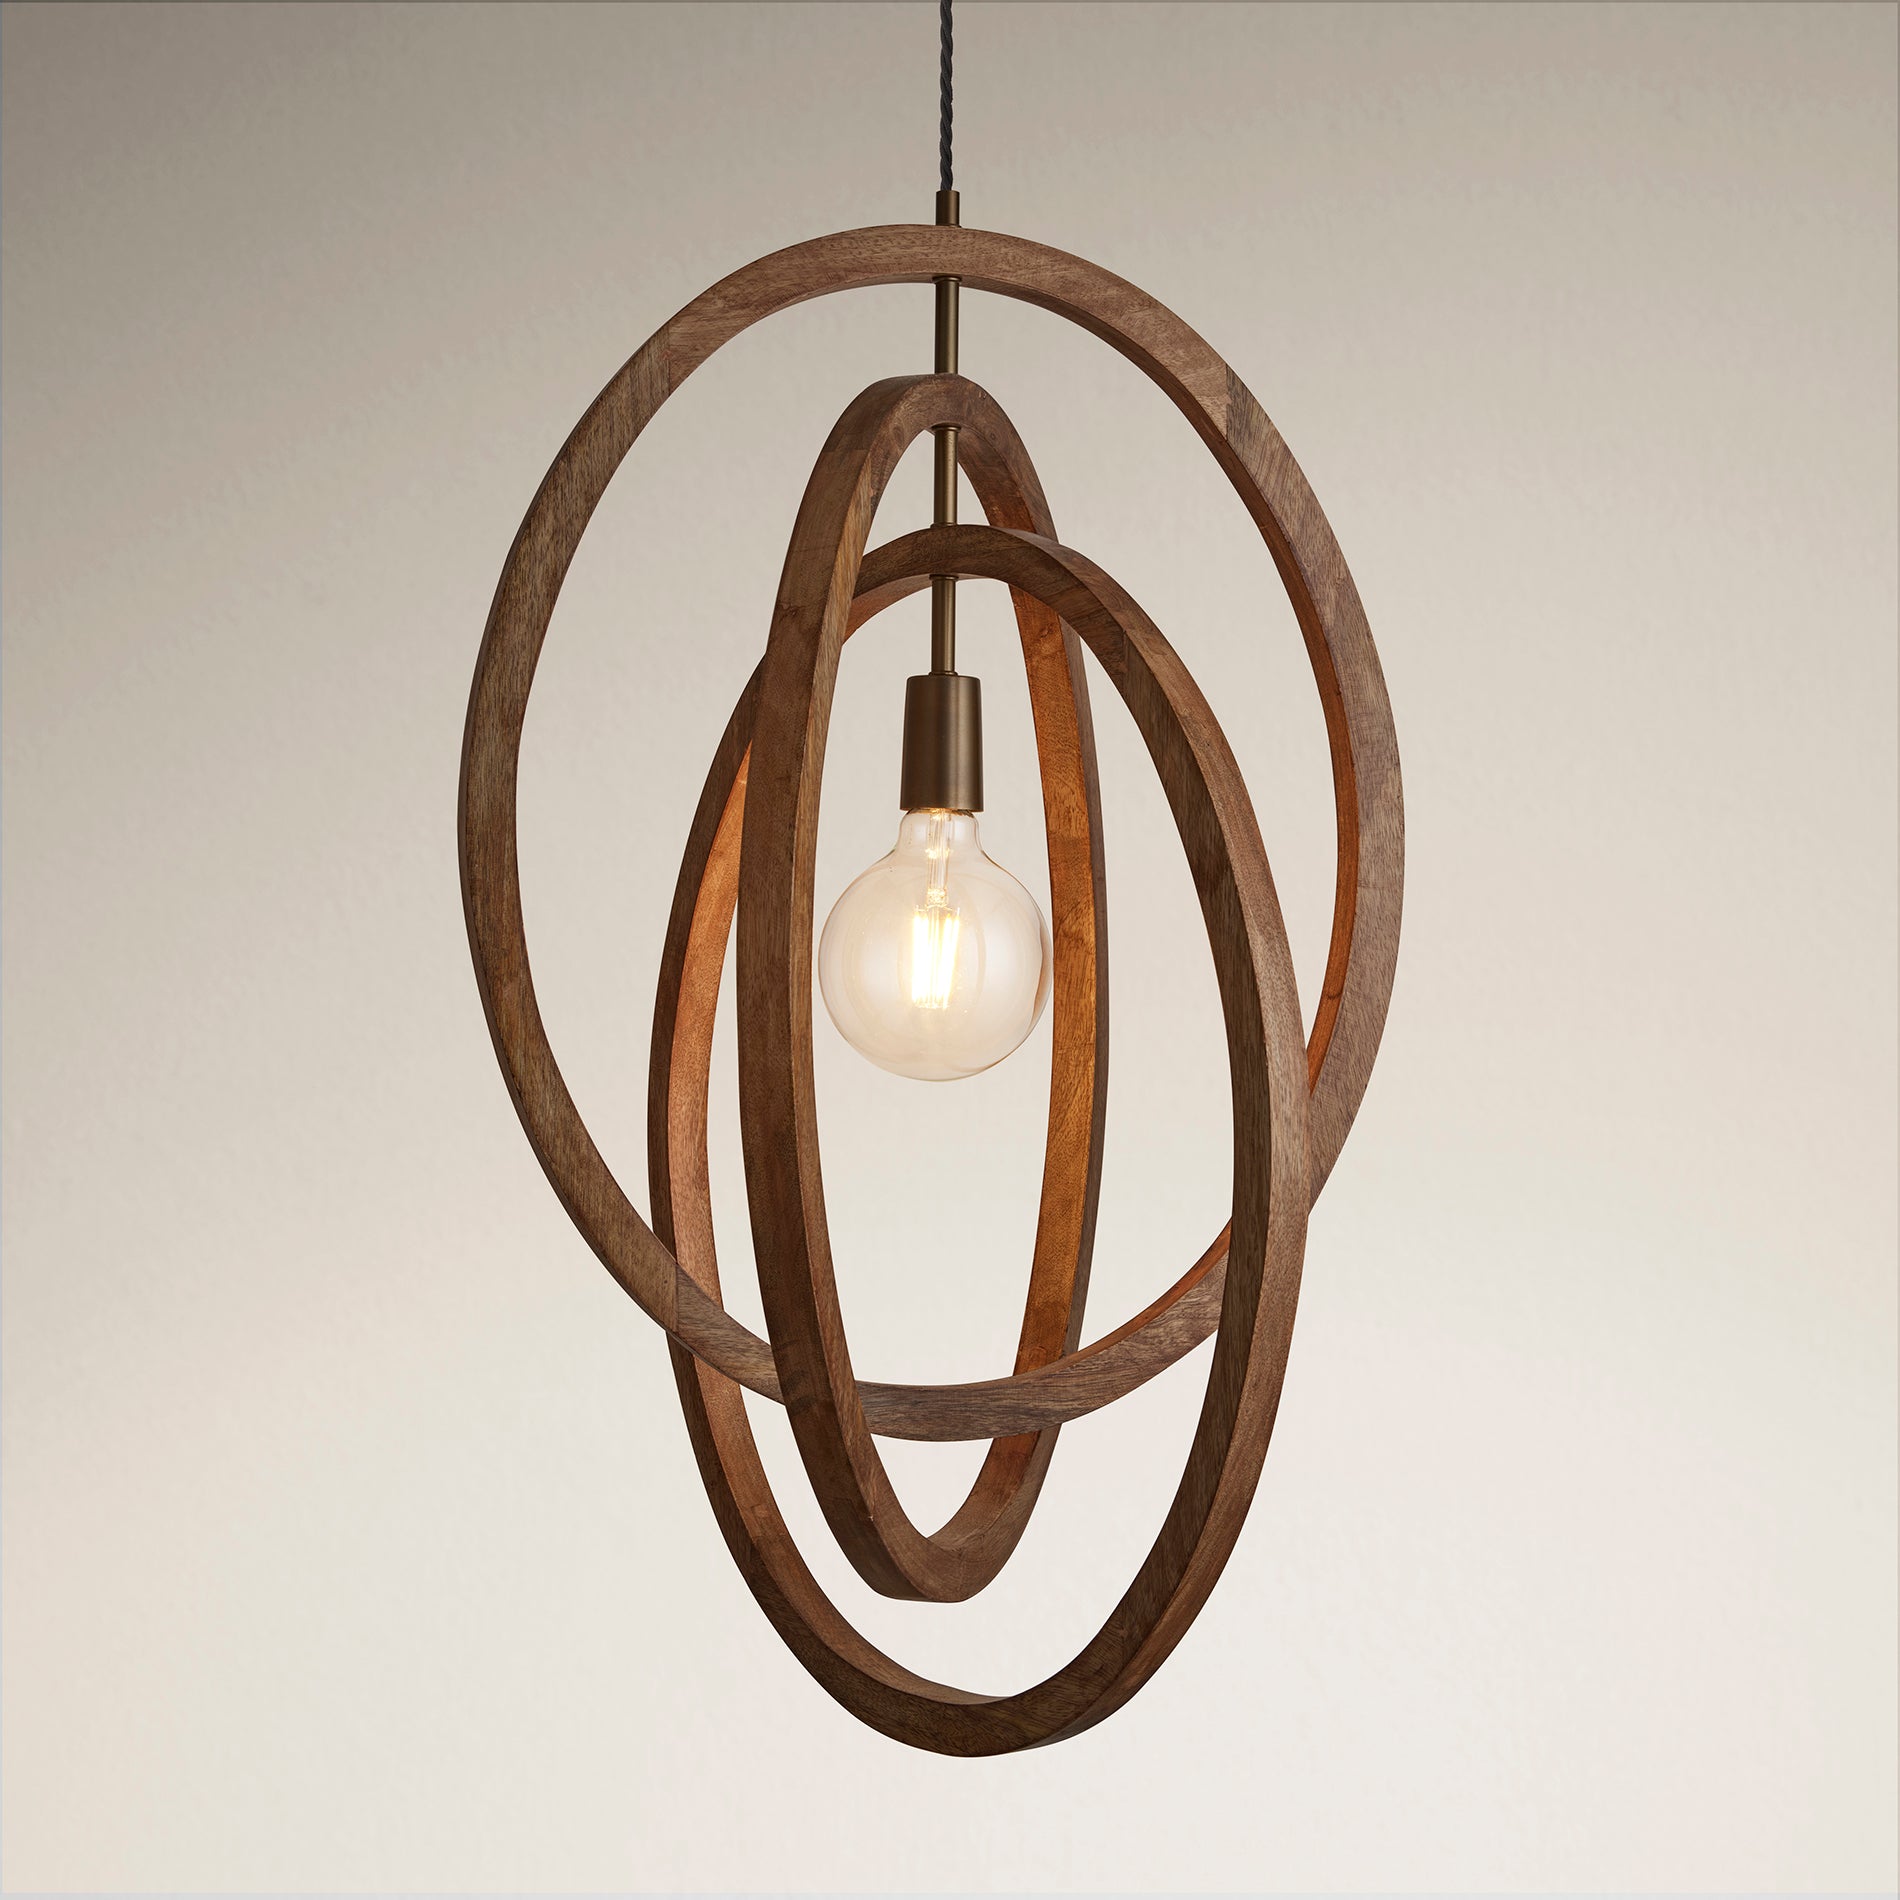 Wooden Geometric Ceiling Pendant Light - 20 inch - Oval - Natural